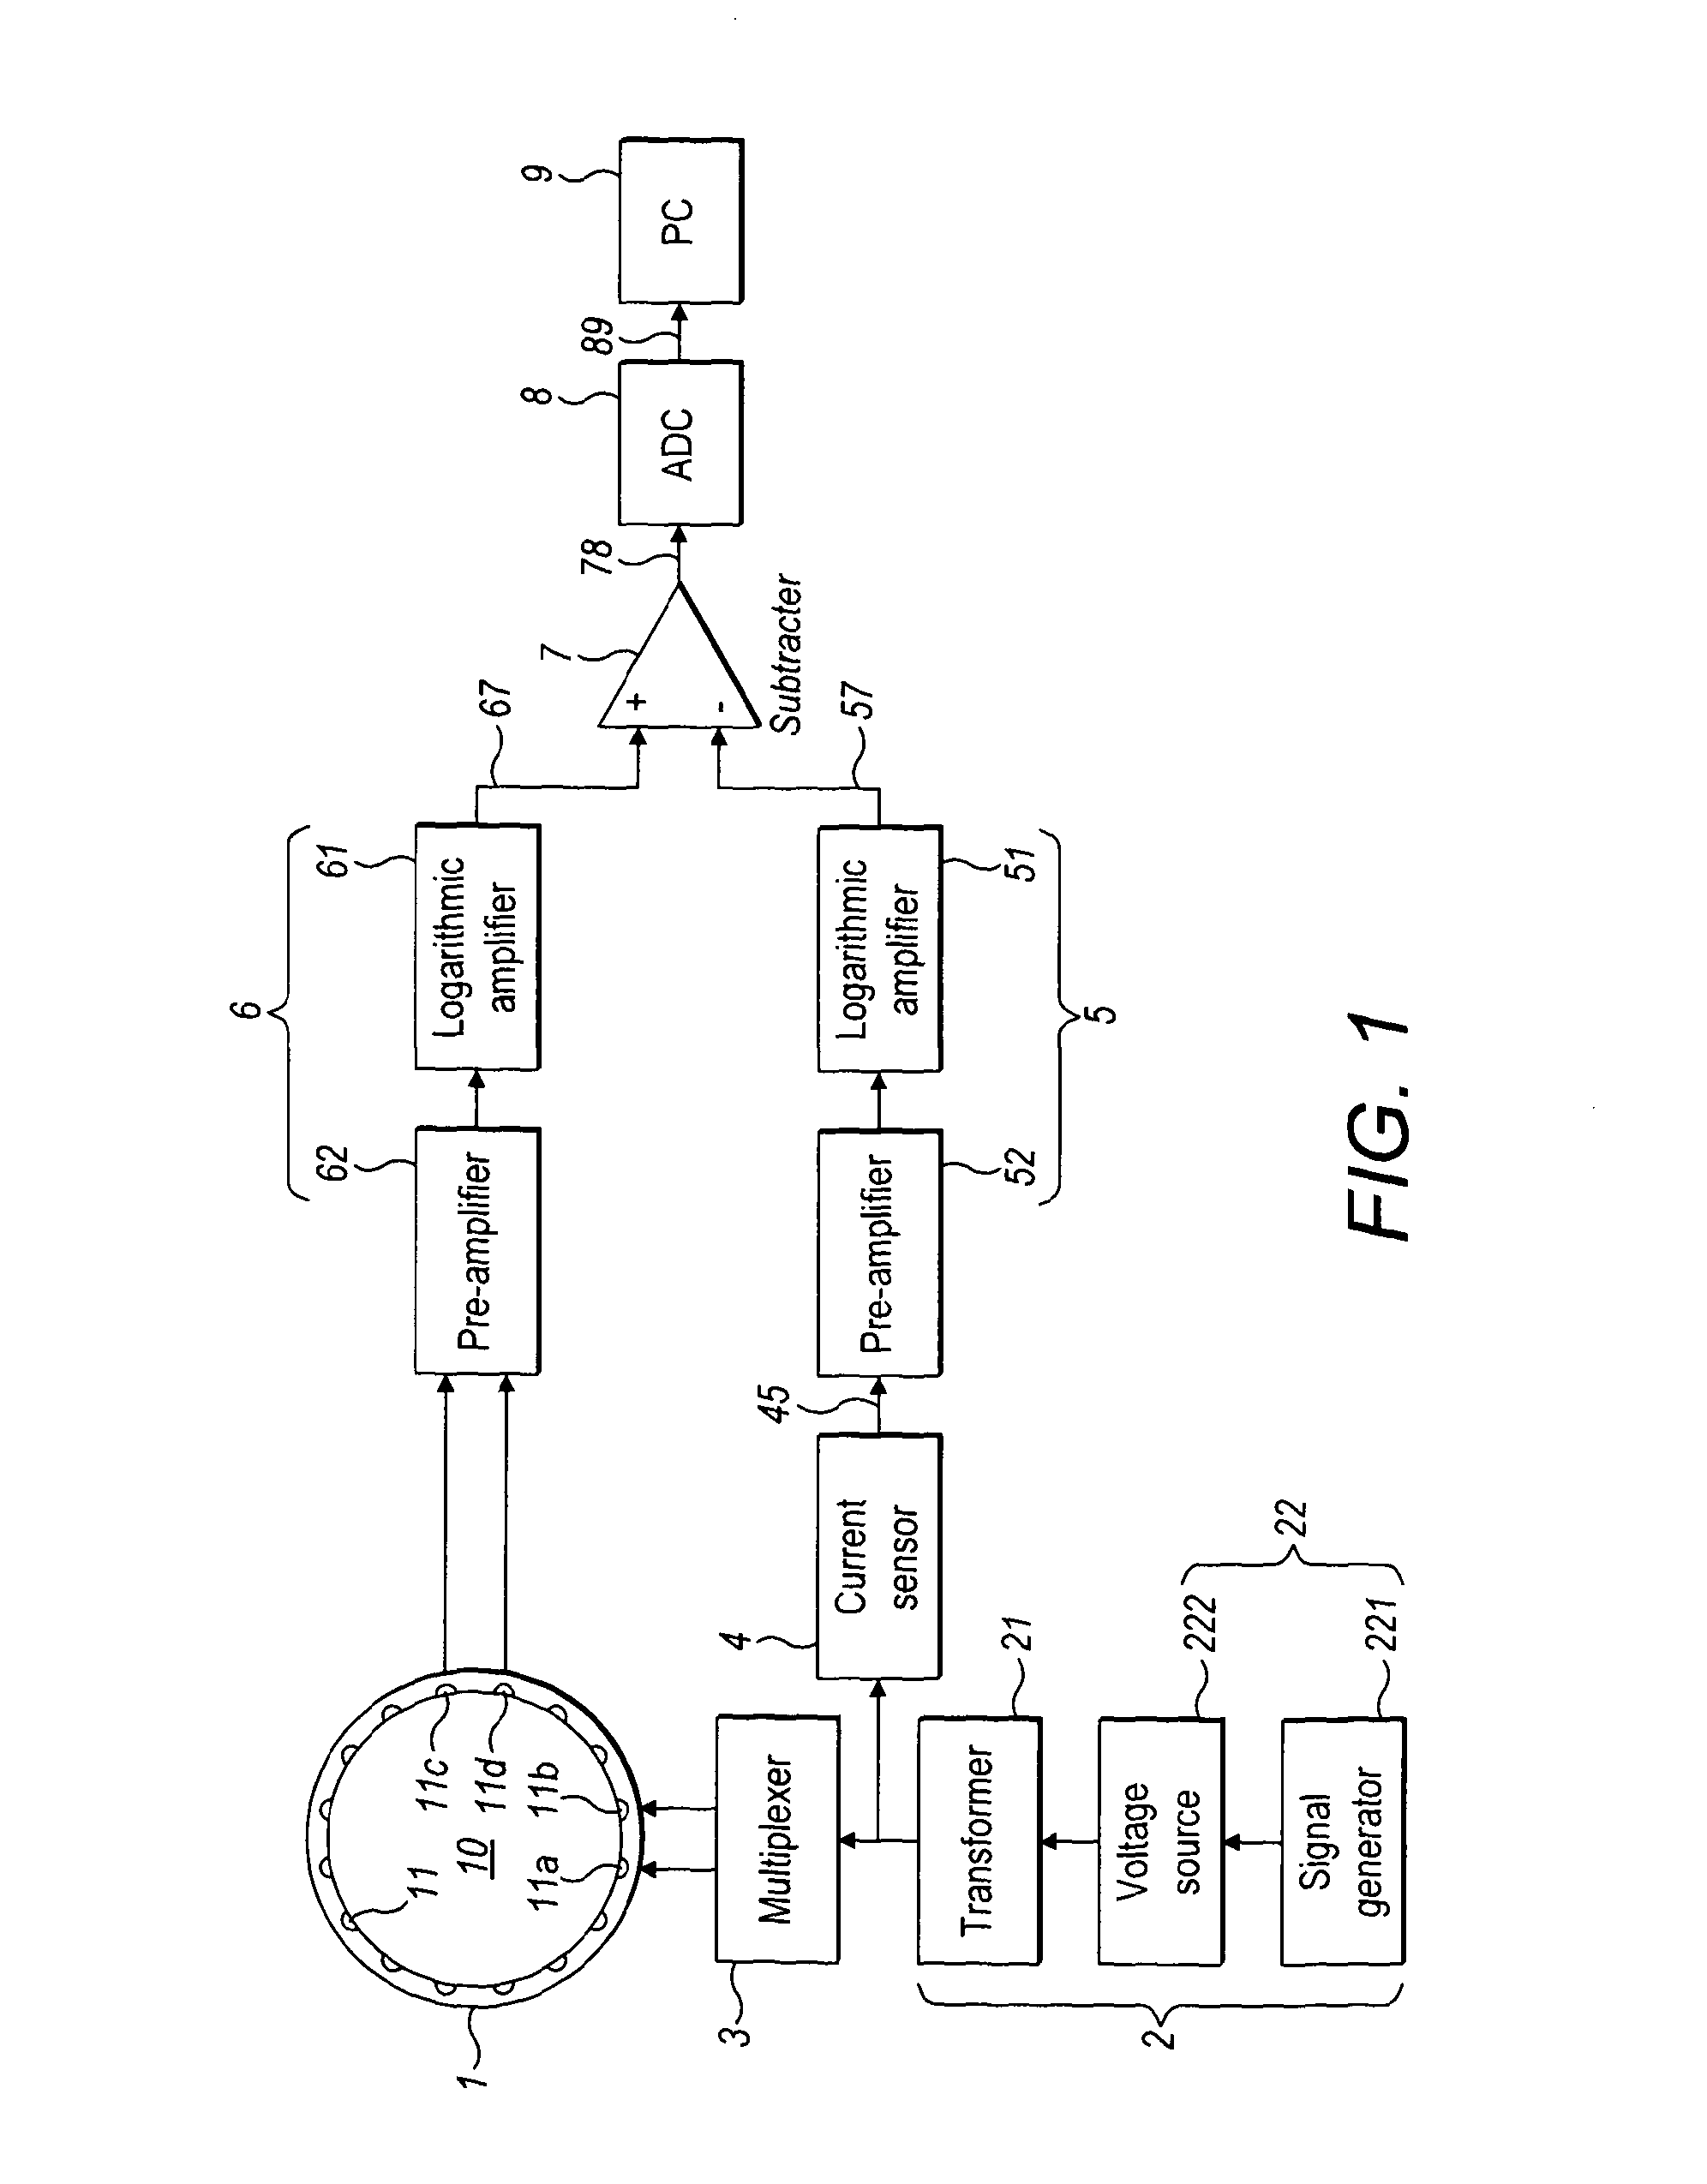 Electrical tomography apparatus and method and current driver